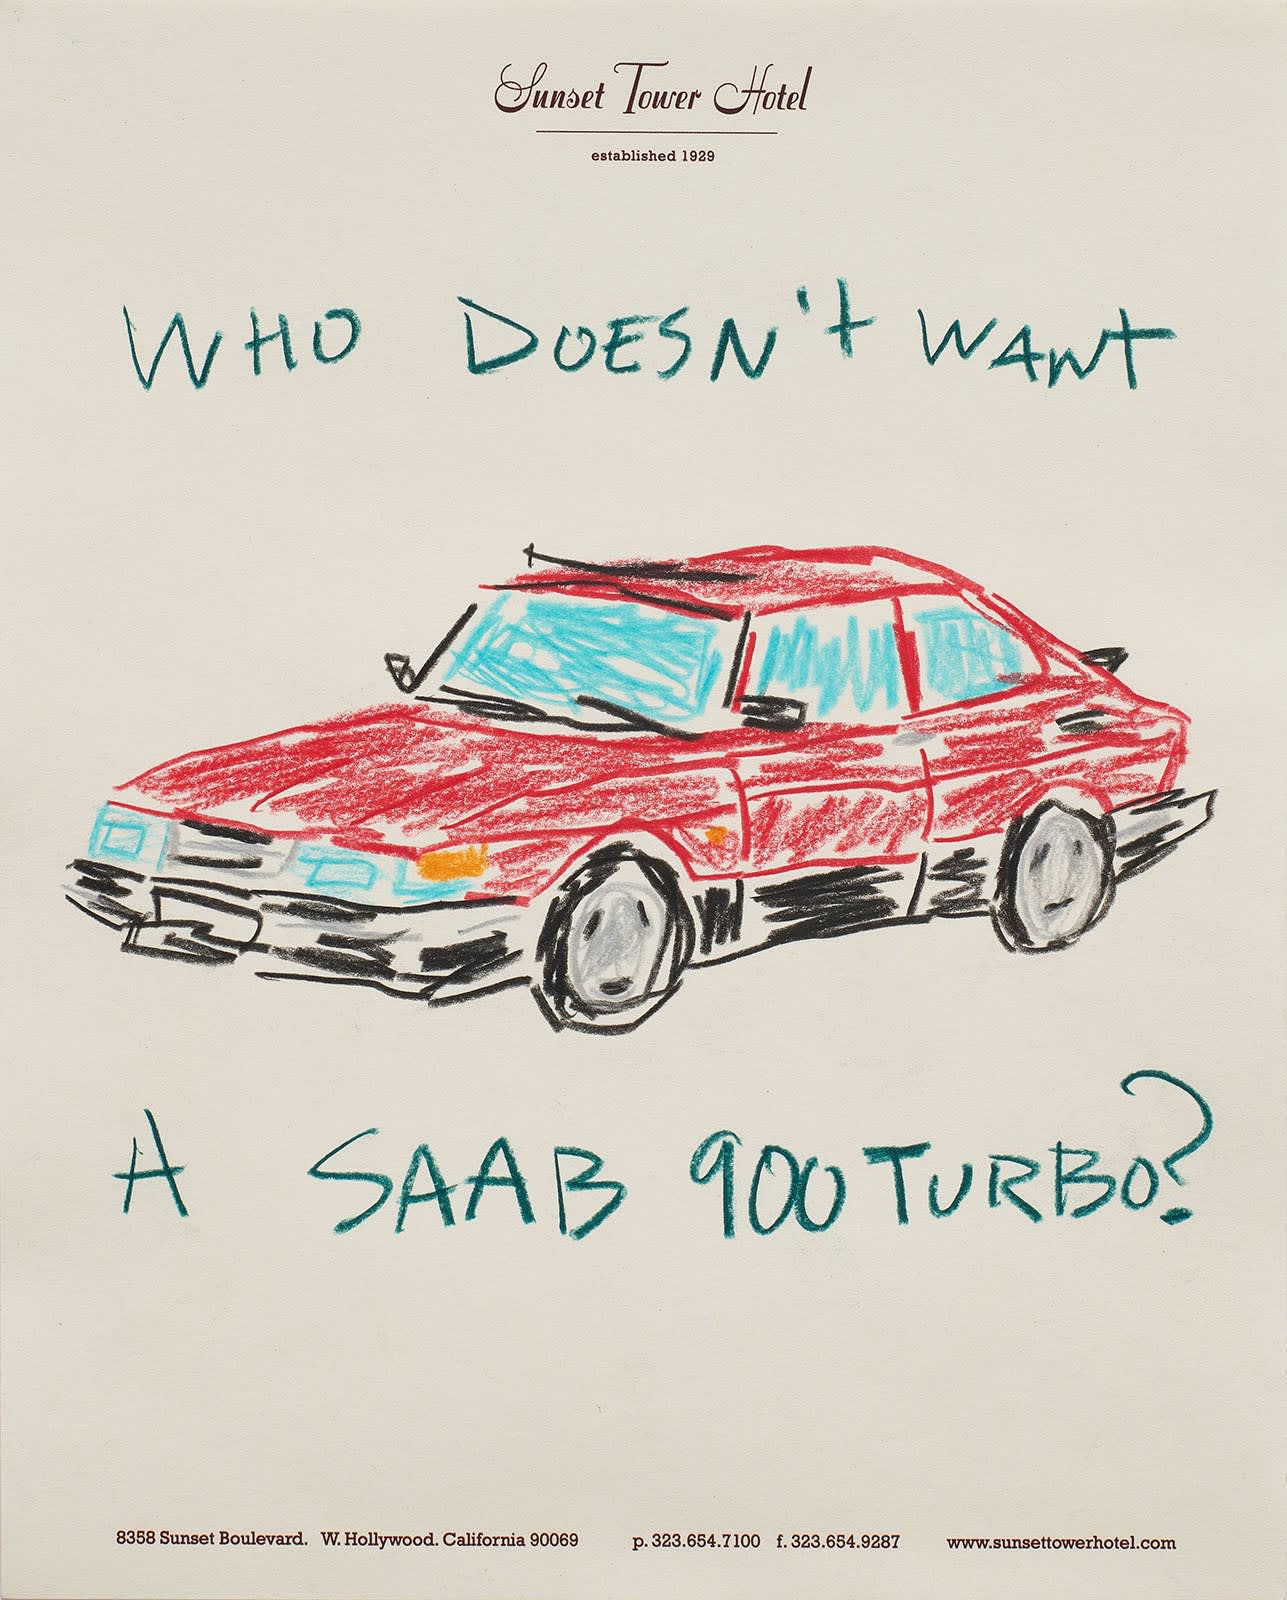 A drawing in pencil crayon by Michael McGregor of a red Saab car. in Blue pencil crayon it reads 